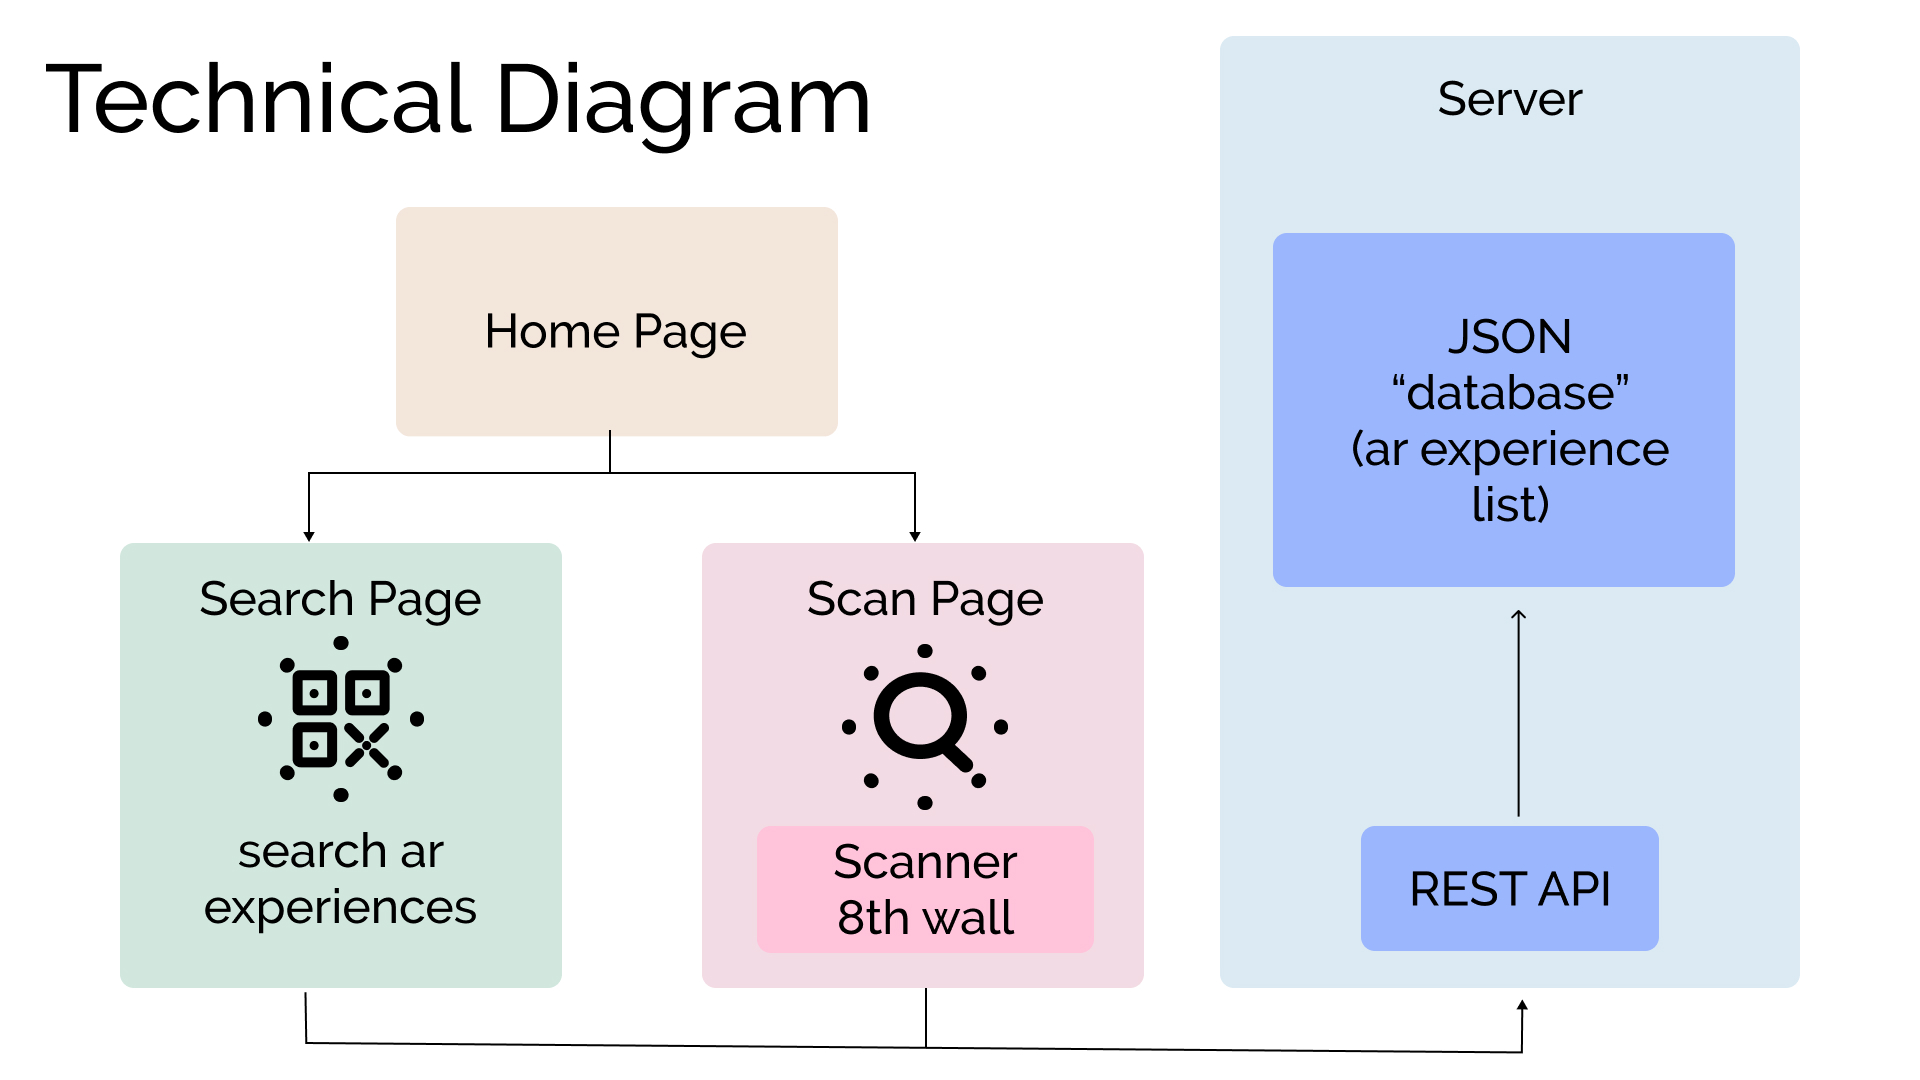 diagram of how the technology works. Visual flow of website home page breaks into search and scan that both lead to the server that uses an REST API to grab the database information from a json file.